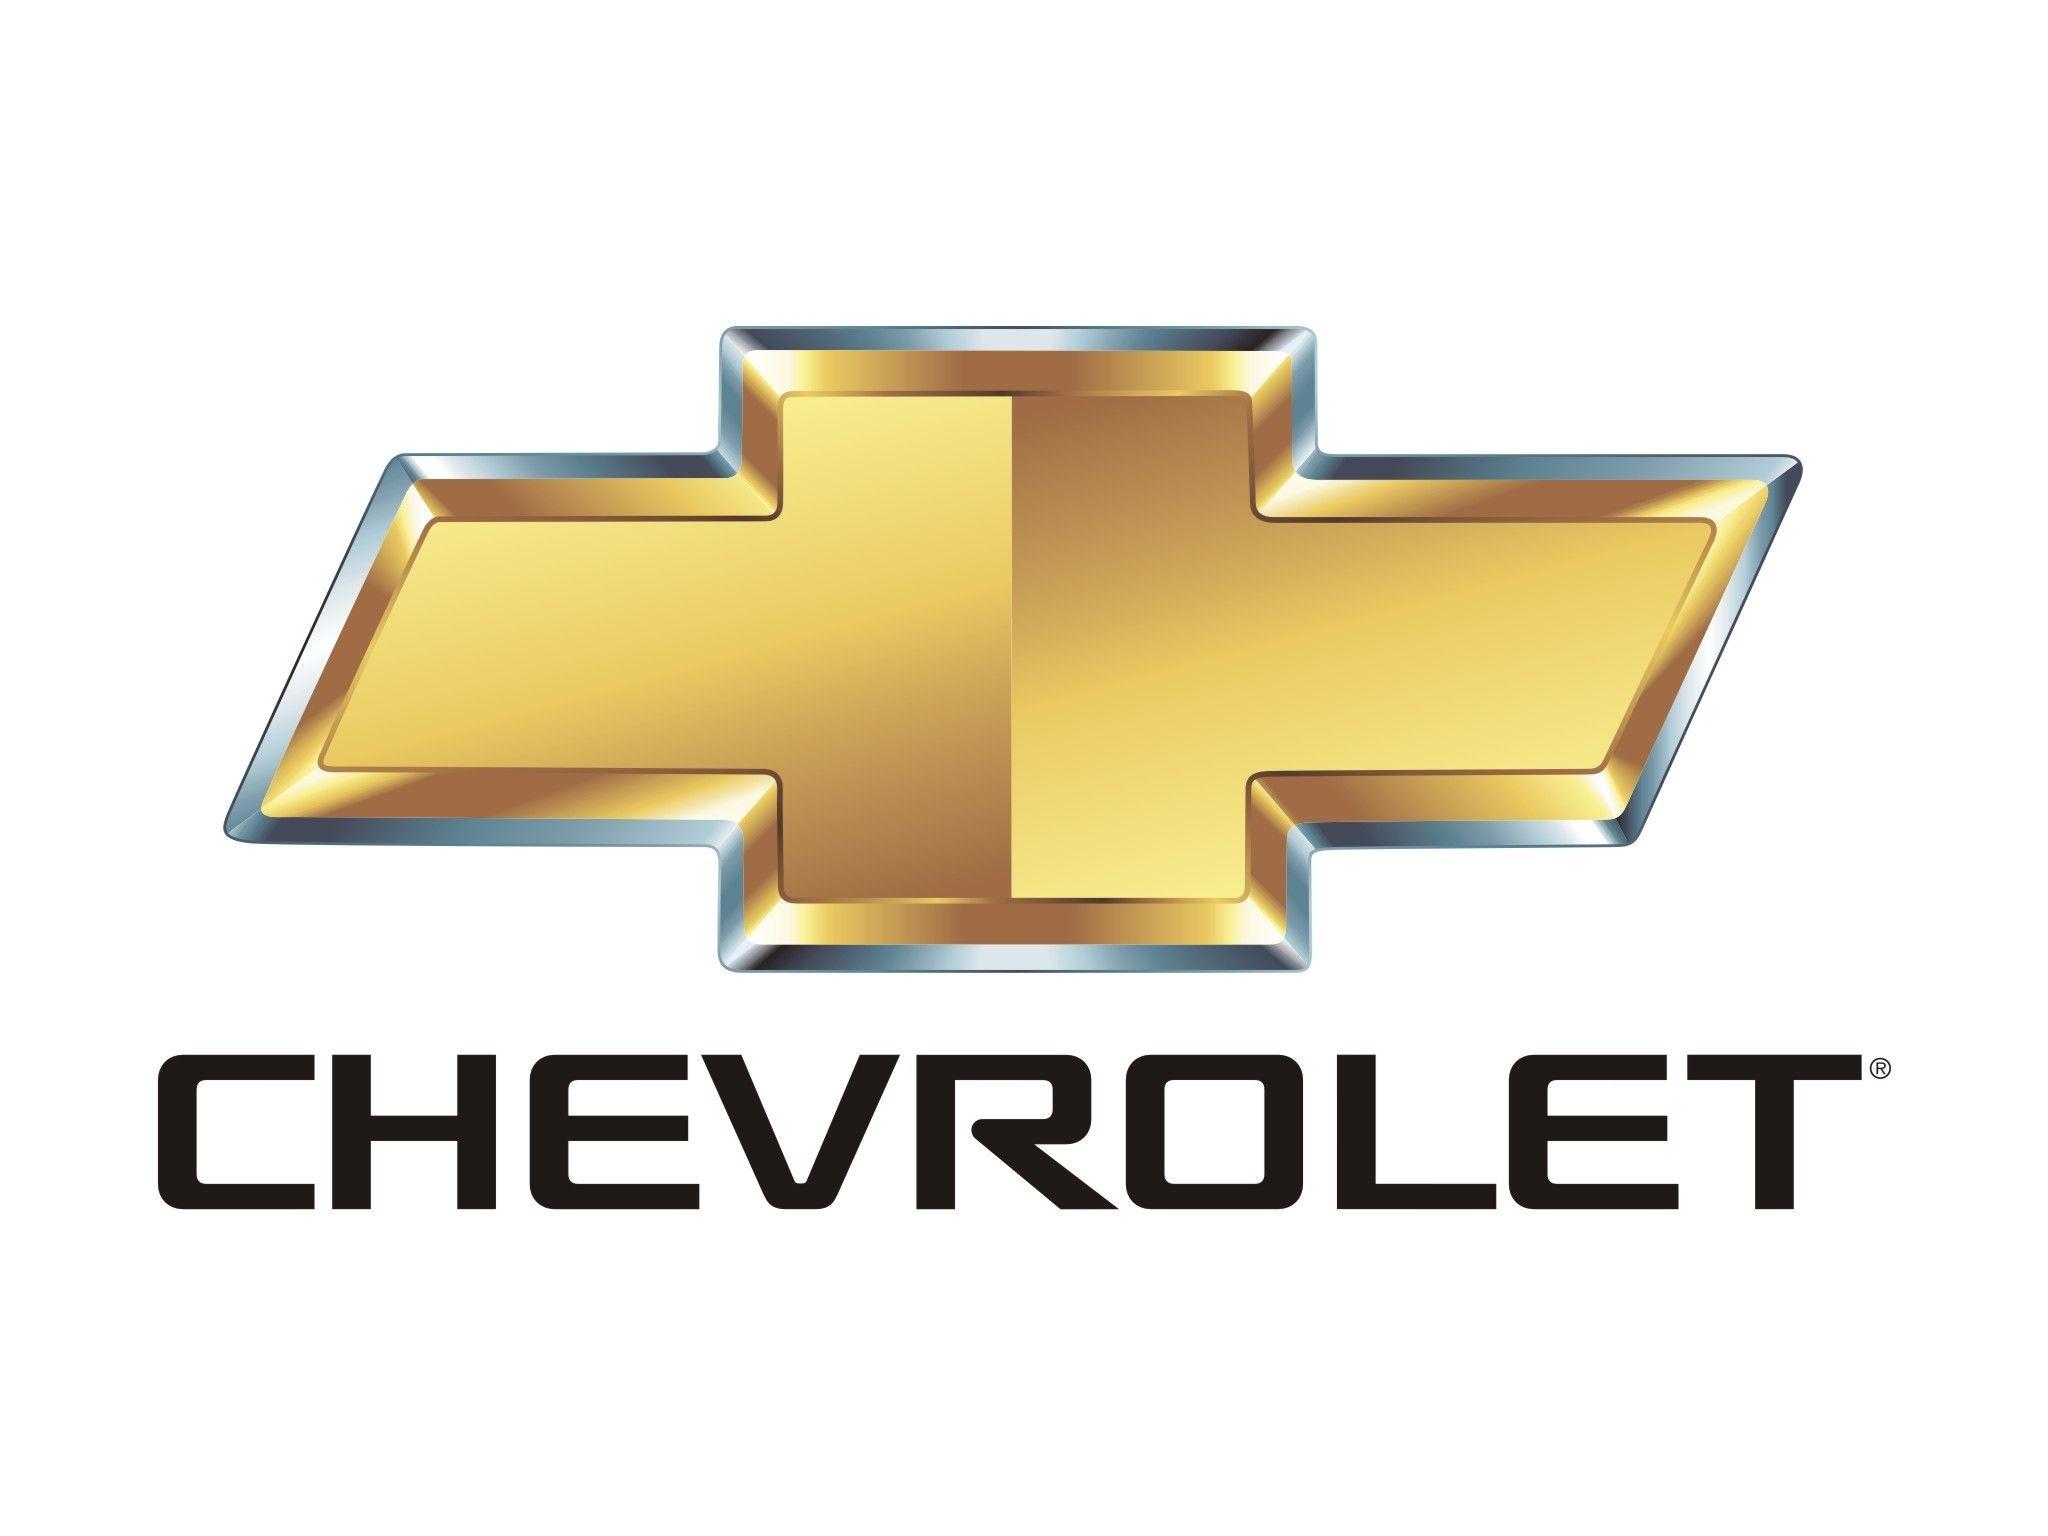 Chevrolet Logo Wallpapers - Top Free